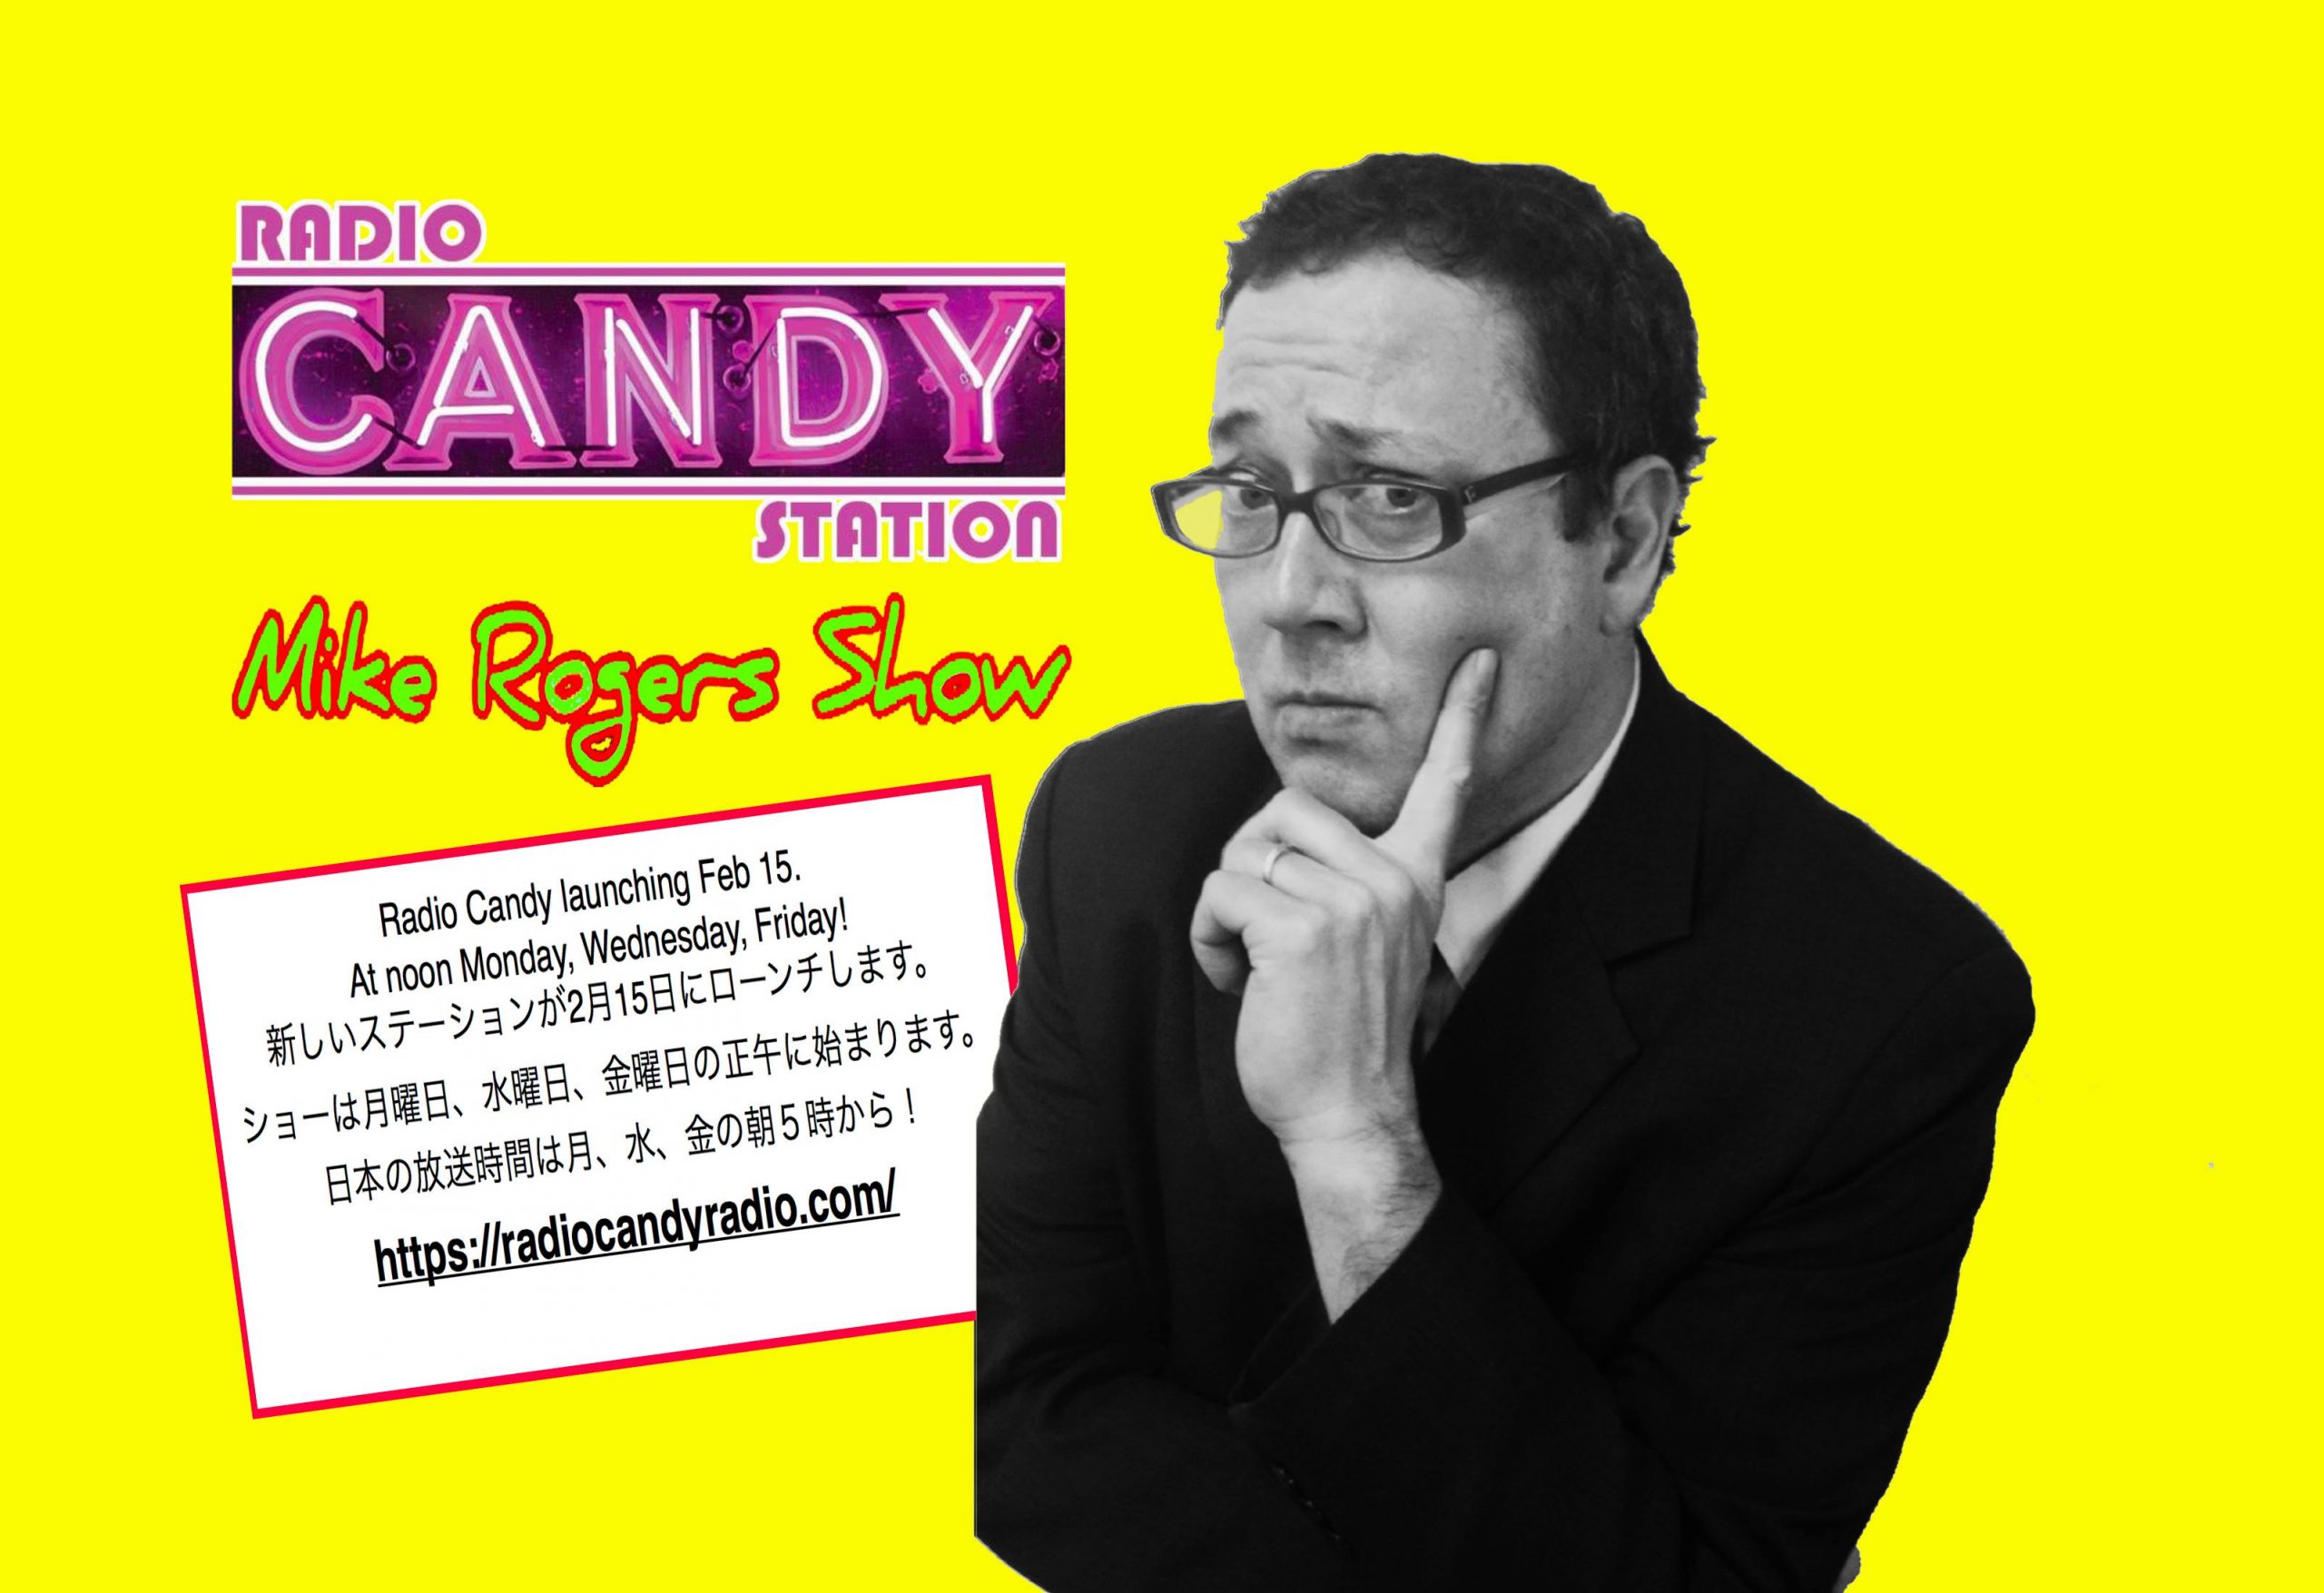 The Mike Rogers Show (Japan) Monday, Wednesdays and Fridays at 12pm PDT